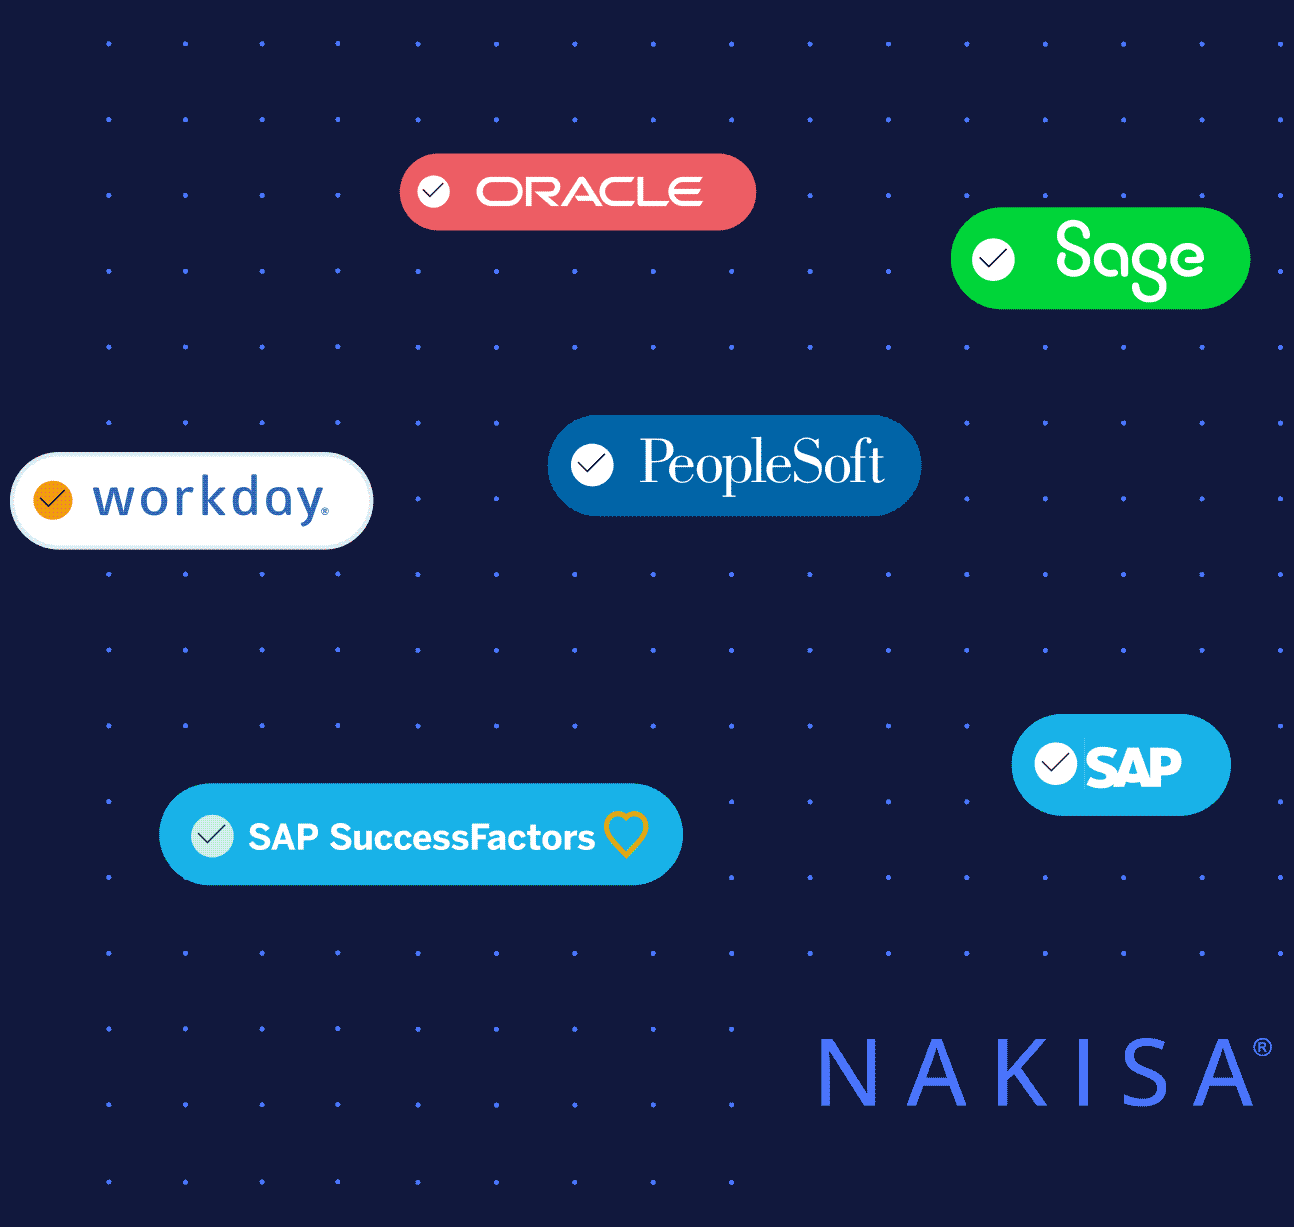 Nakisa HR Suite integrates with SAP HCM, SAP SuccessFactors (SFSF), Oracle, PeopleSoft, Workday, and more